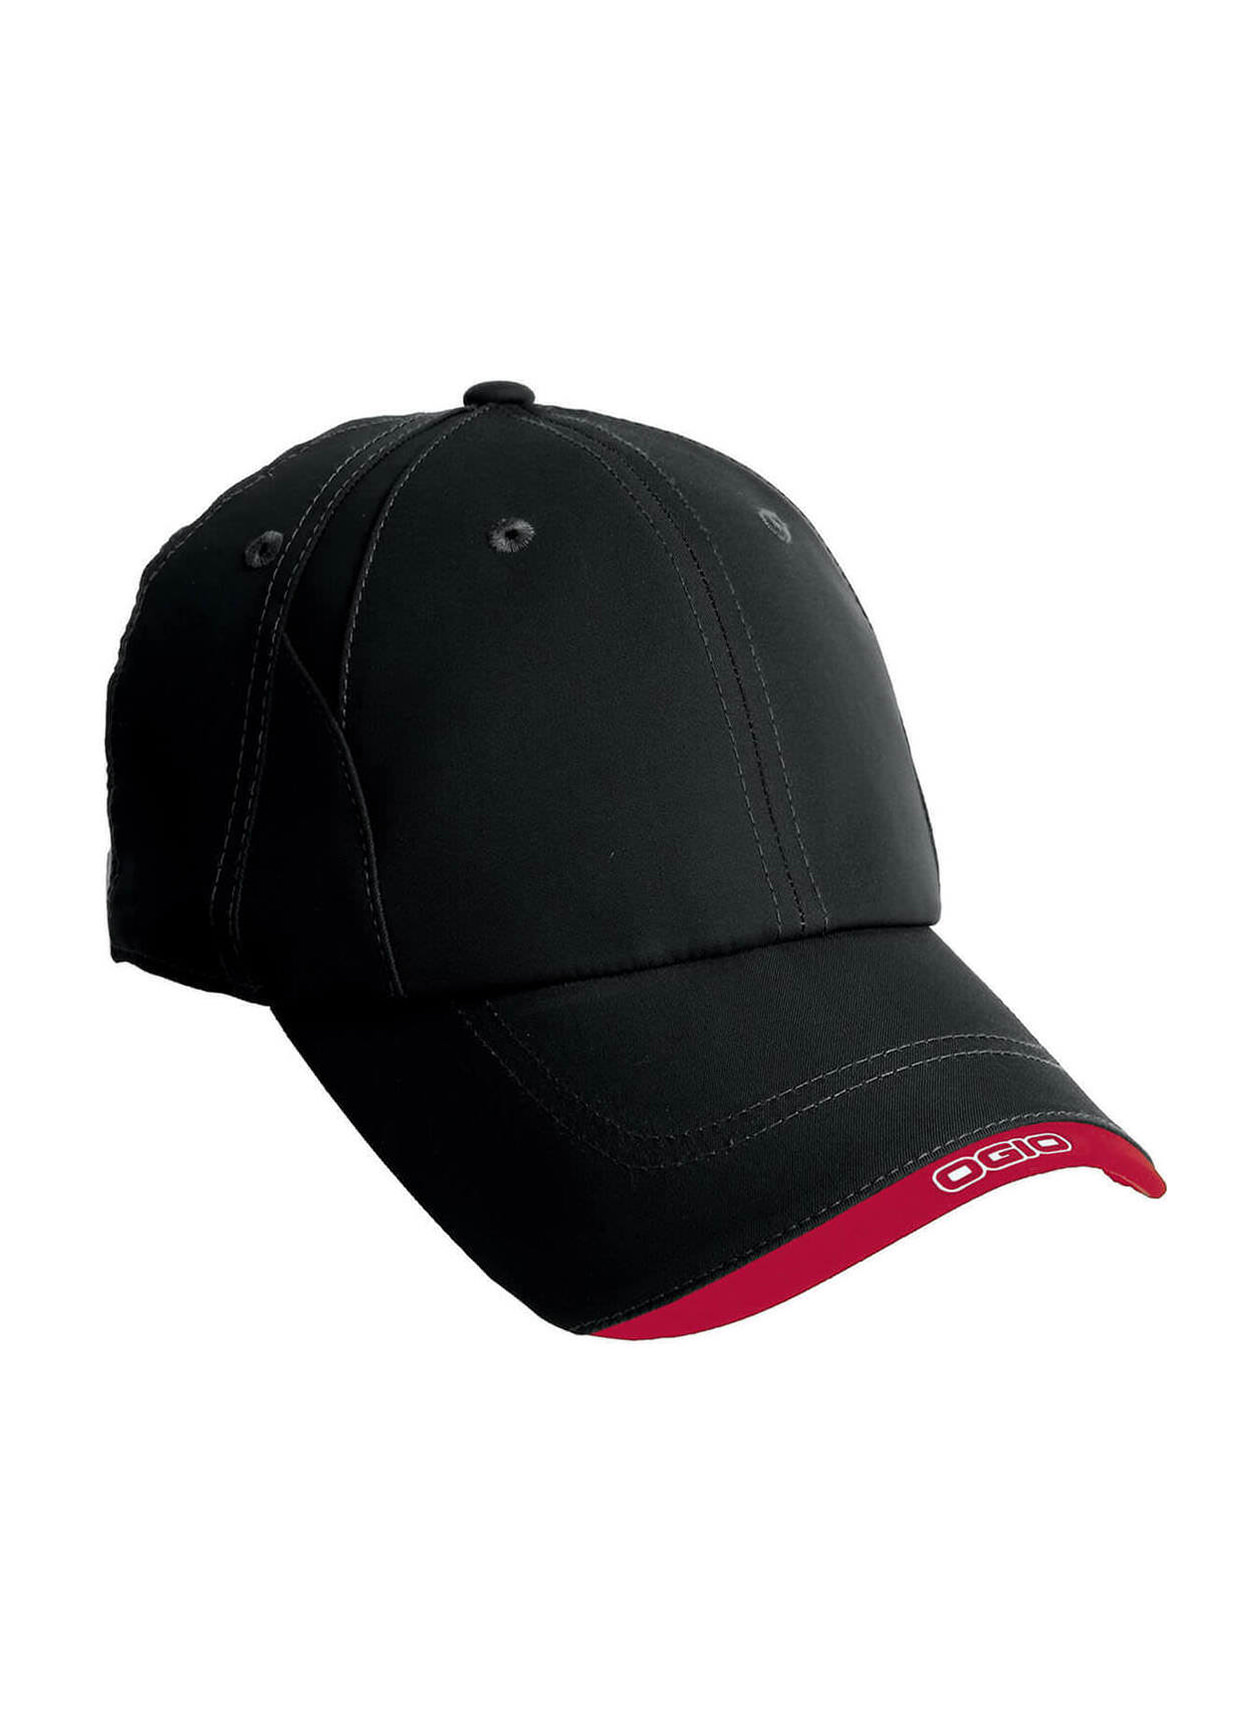 OGIO Blacktop / Chili Red X-Over Hat